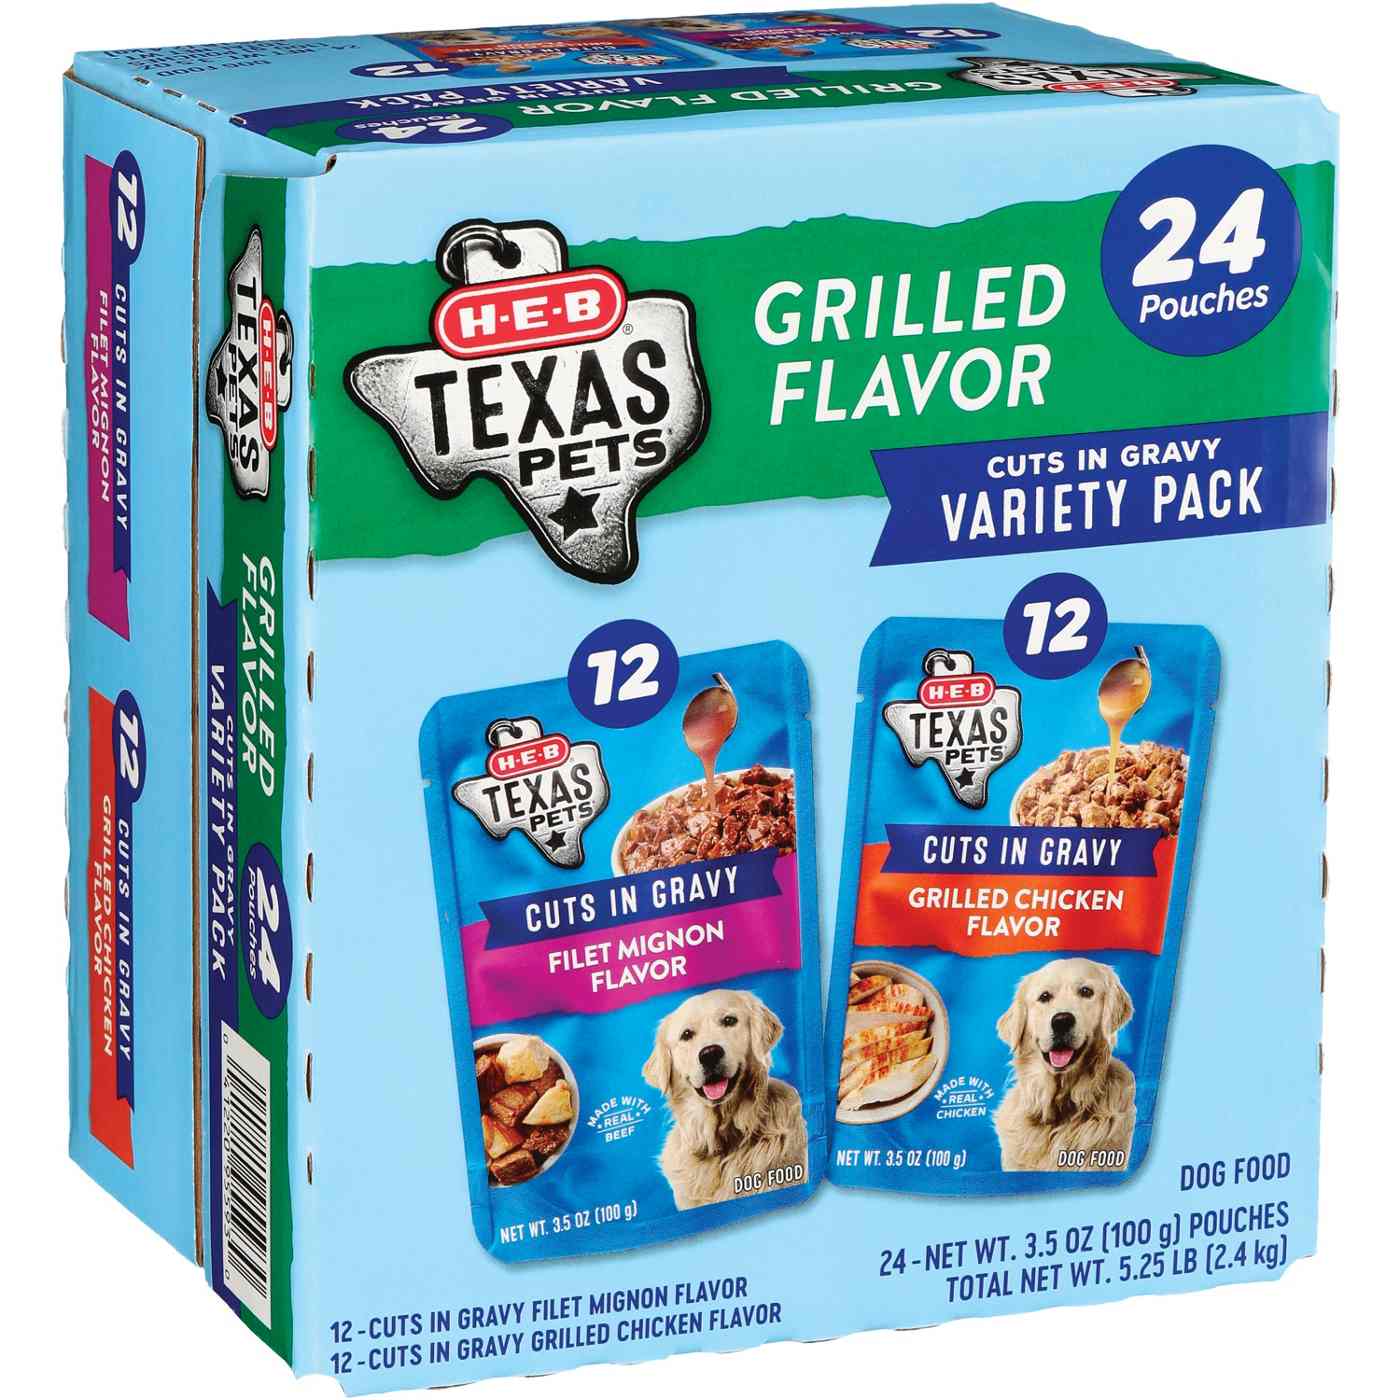 H-E-B Texas Pets Cuts in Gravy Wet Dog Food Pouches Grilled Flavor Variety Pack – Chicken & Filet Mignon; image 2 of 2